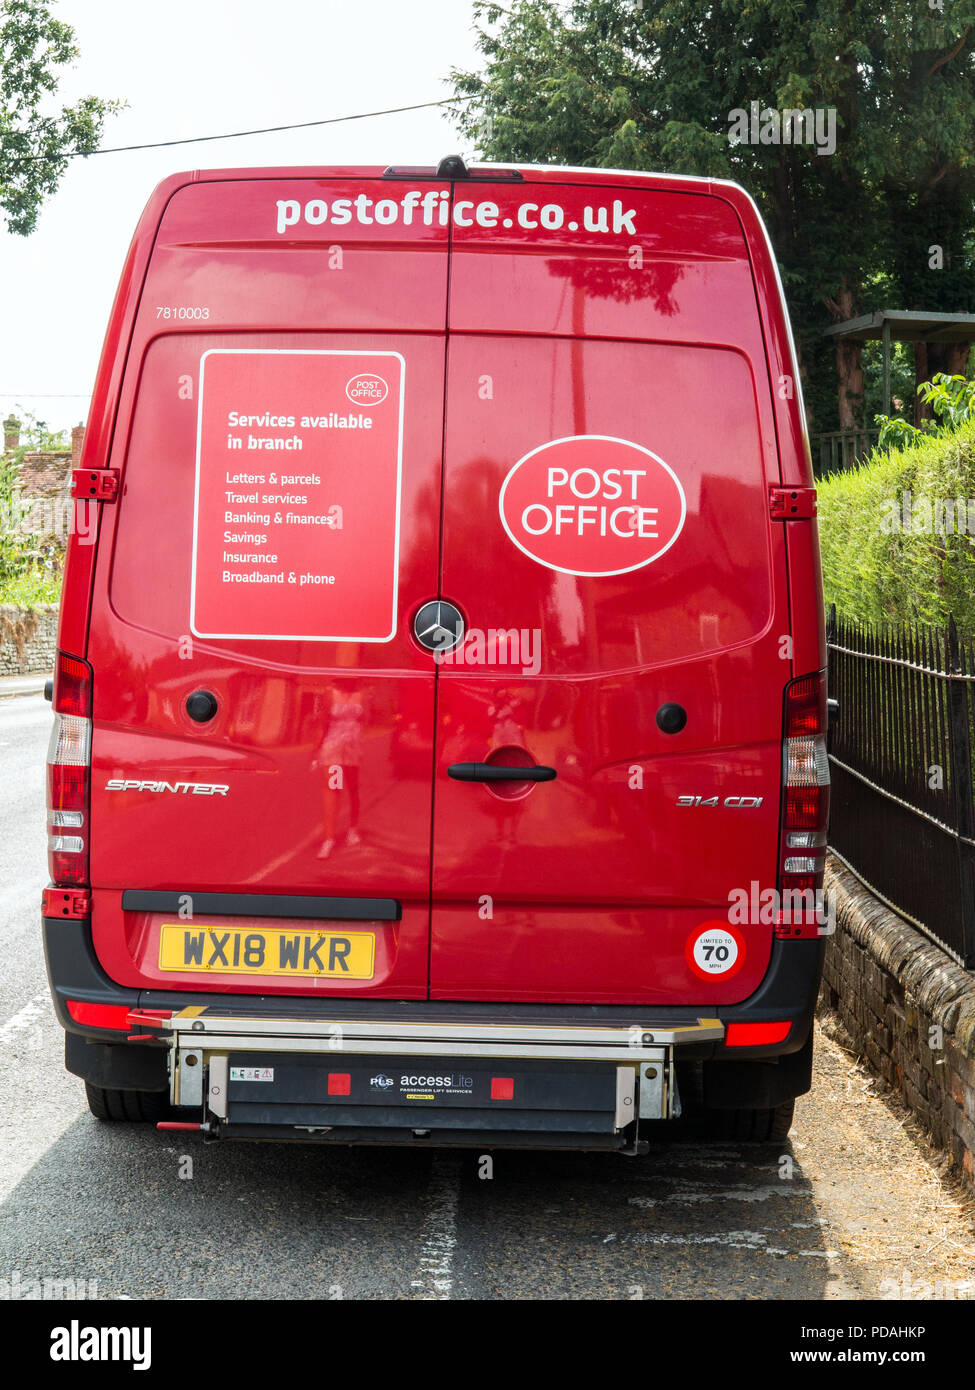 Mobile Post Office Van High Resolution Stock Photography and Images - Alamy